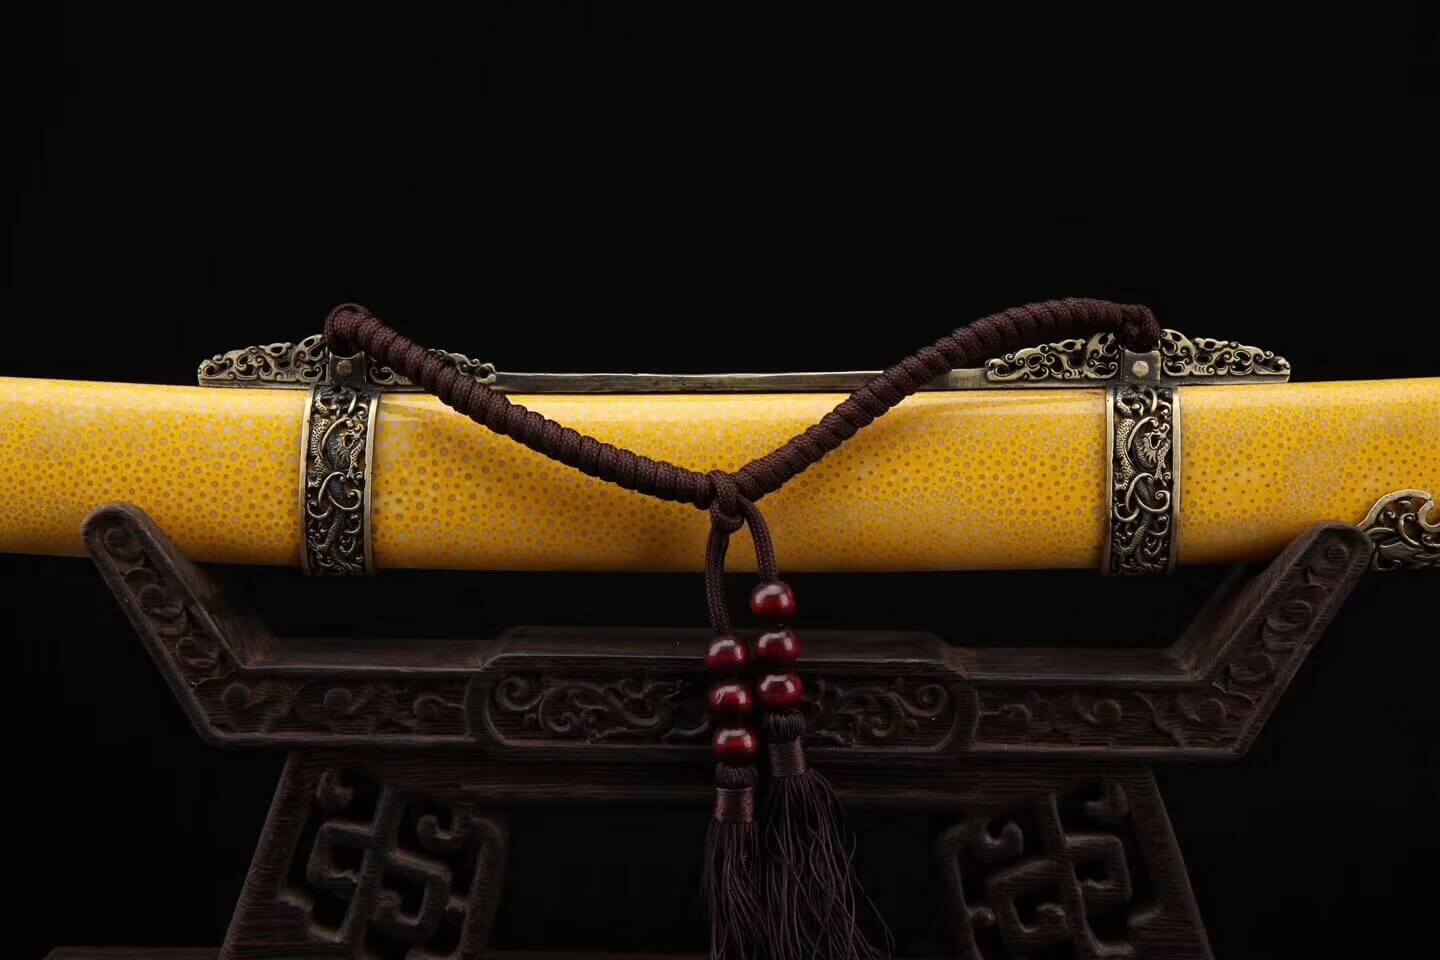 Qing imperial sword,Broadsword,Folded steel blade,Yellow Scabbard,Brass fitting - Chinese sword shop